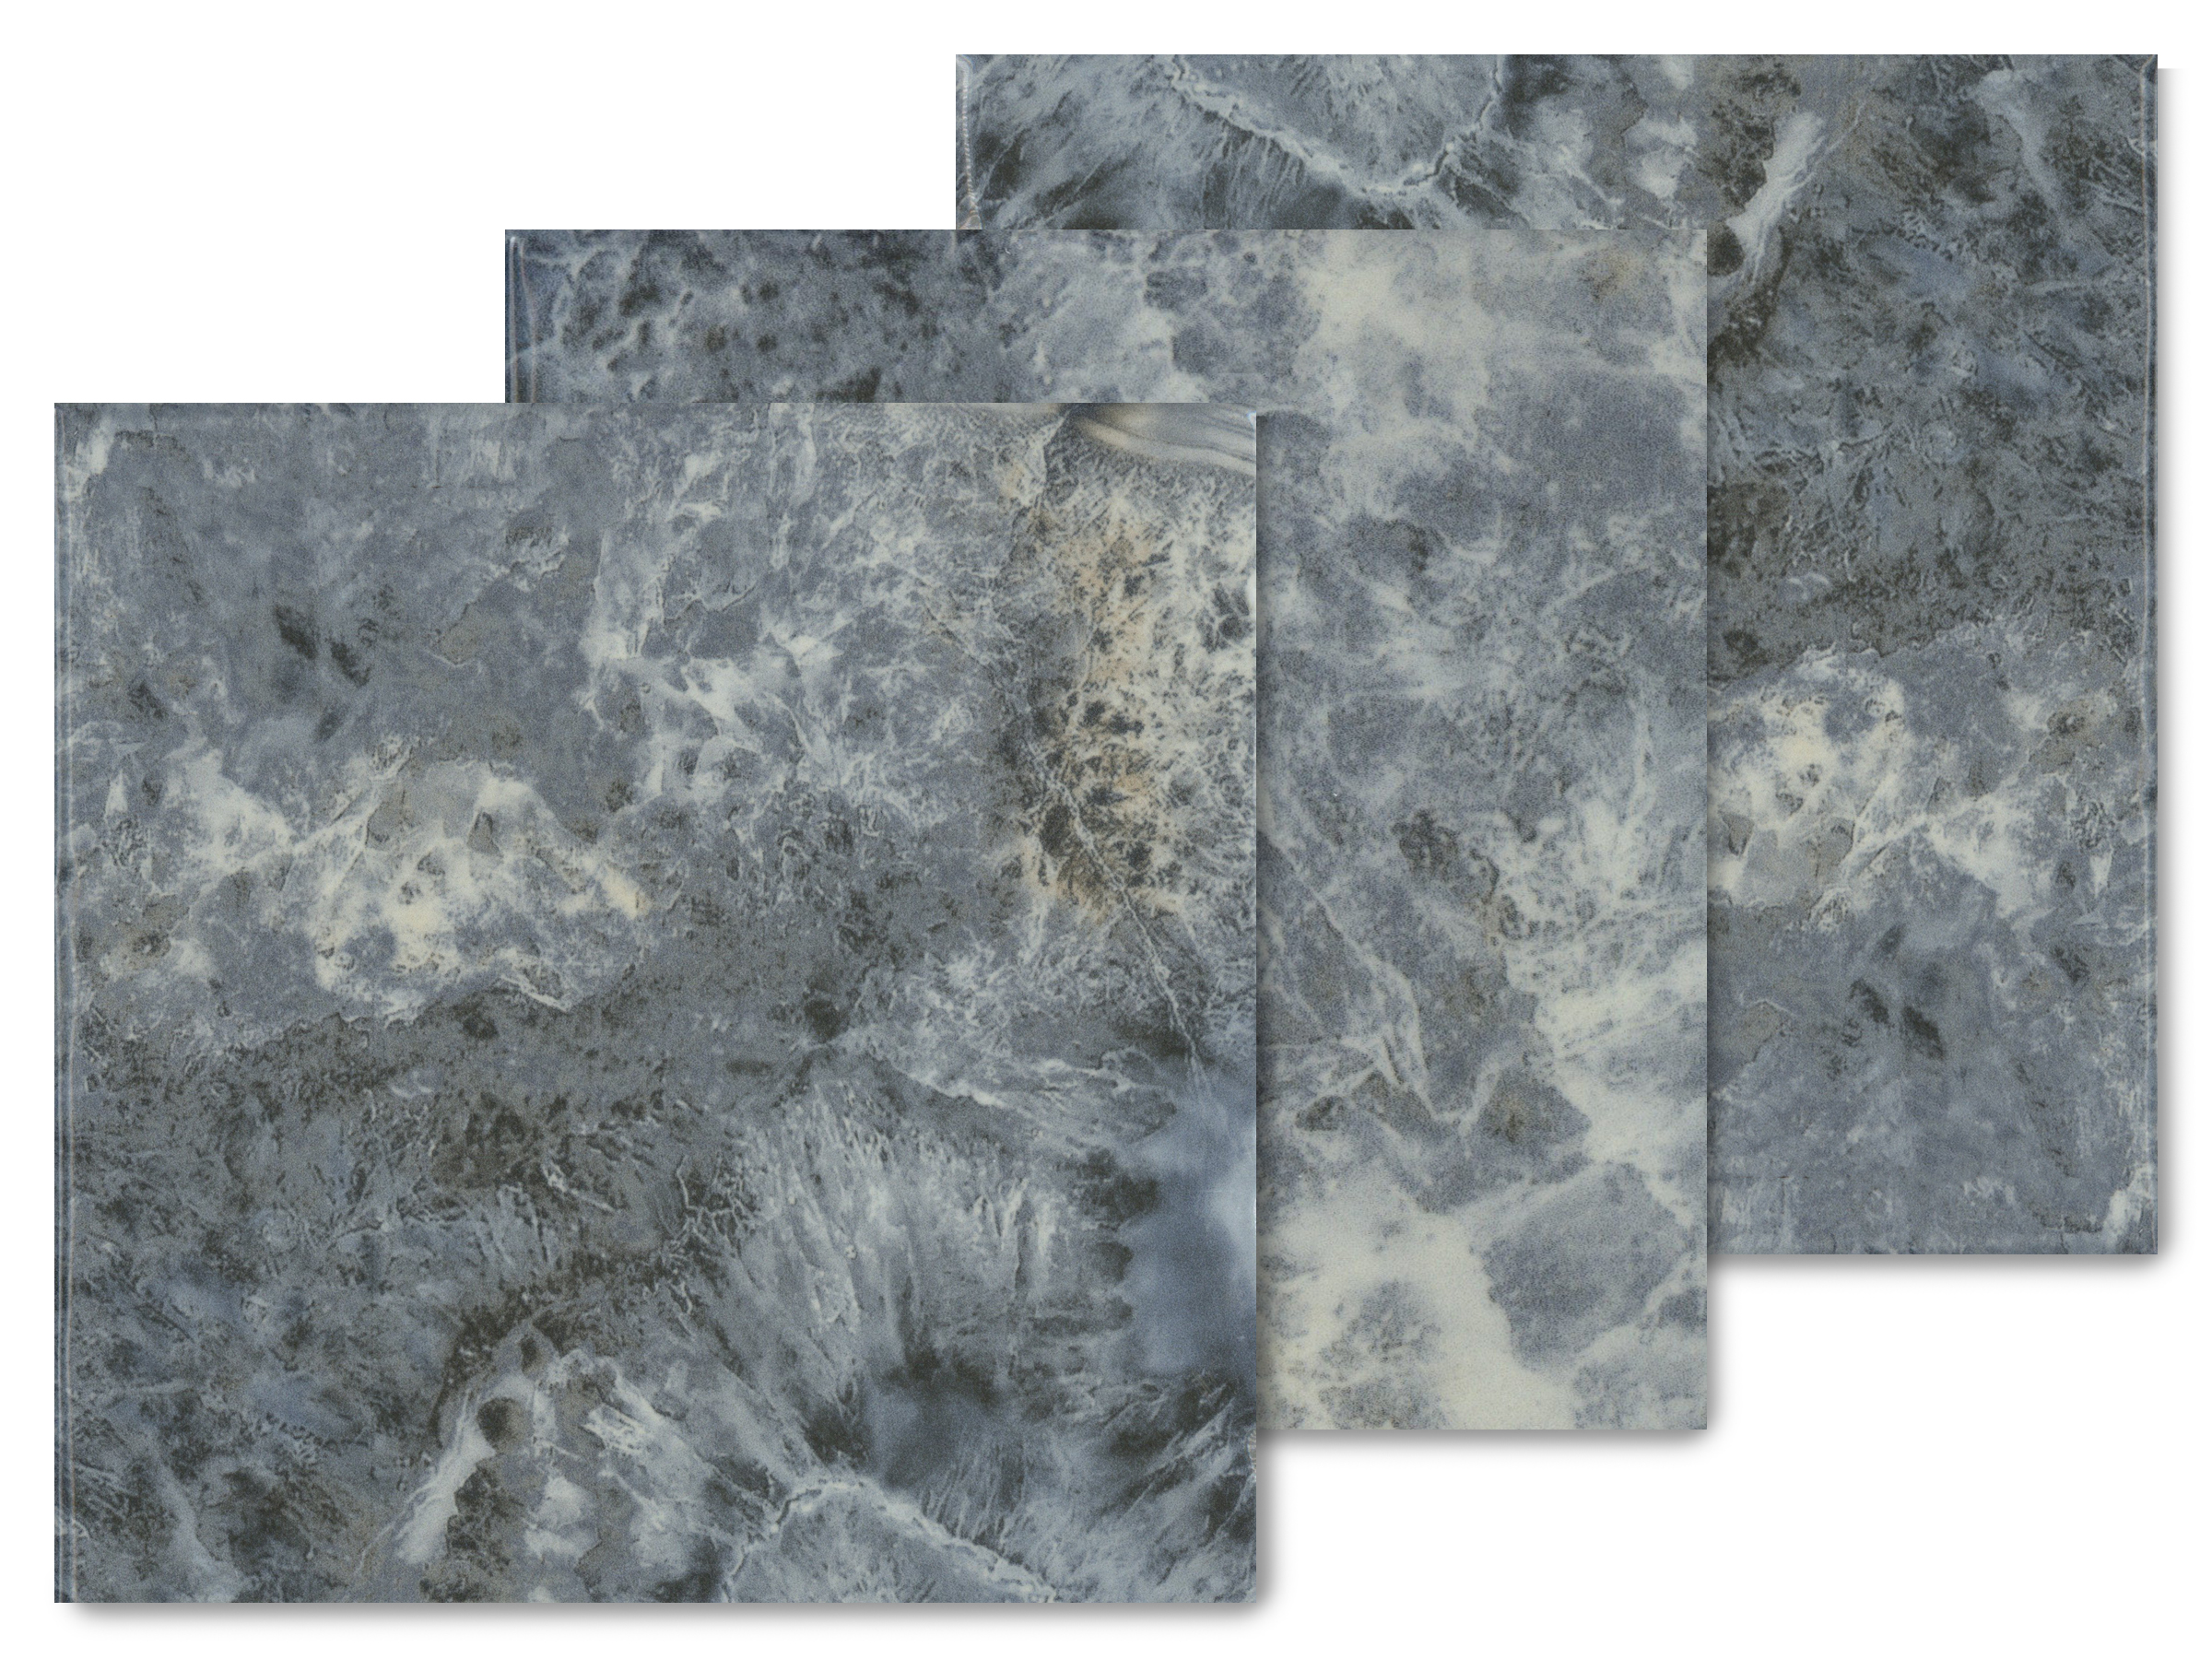 Oyster 6 inch by 6 inch tile